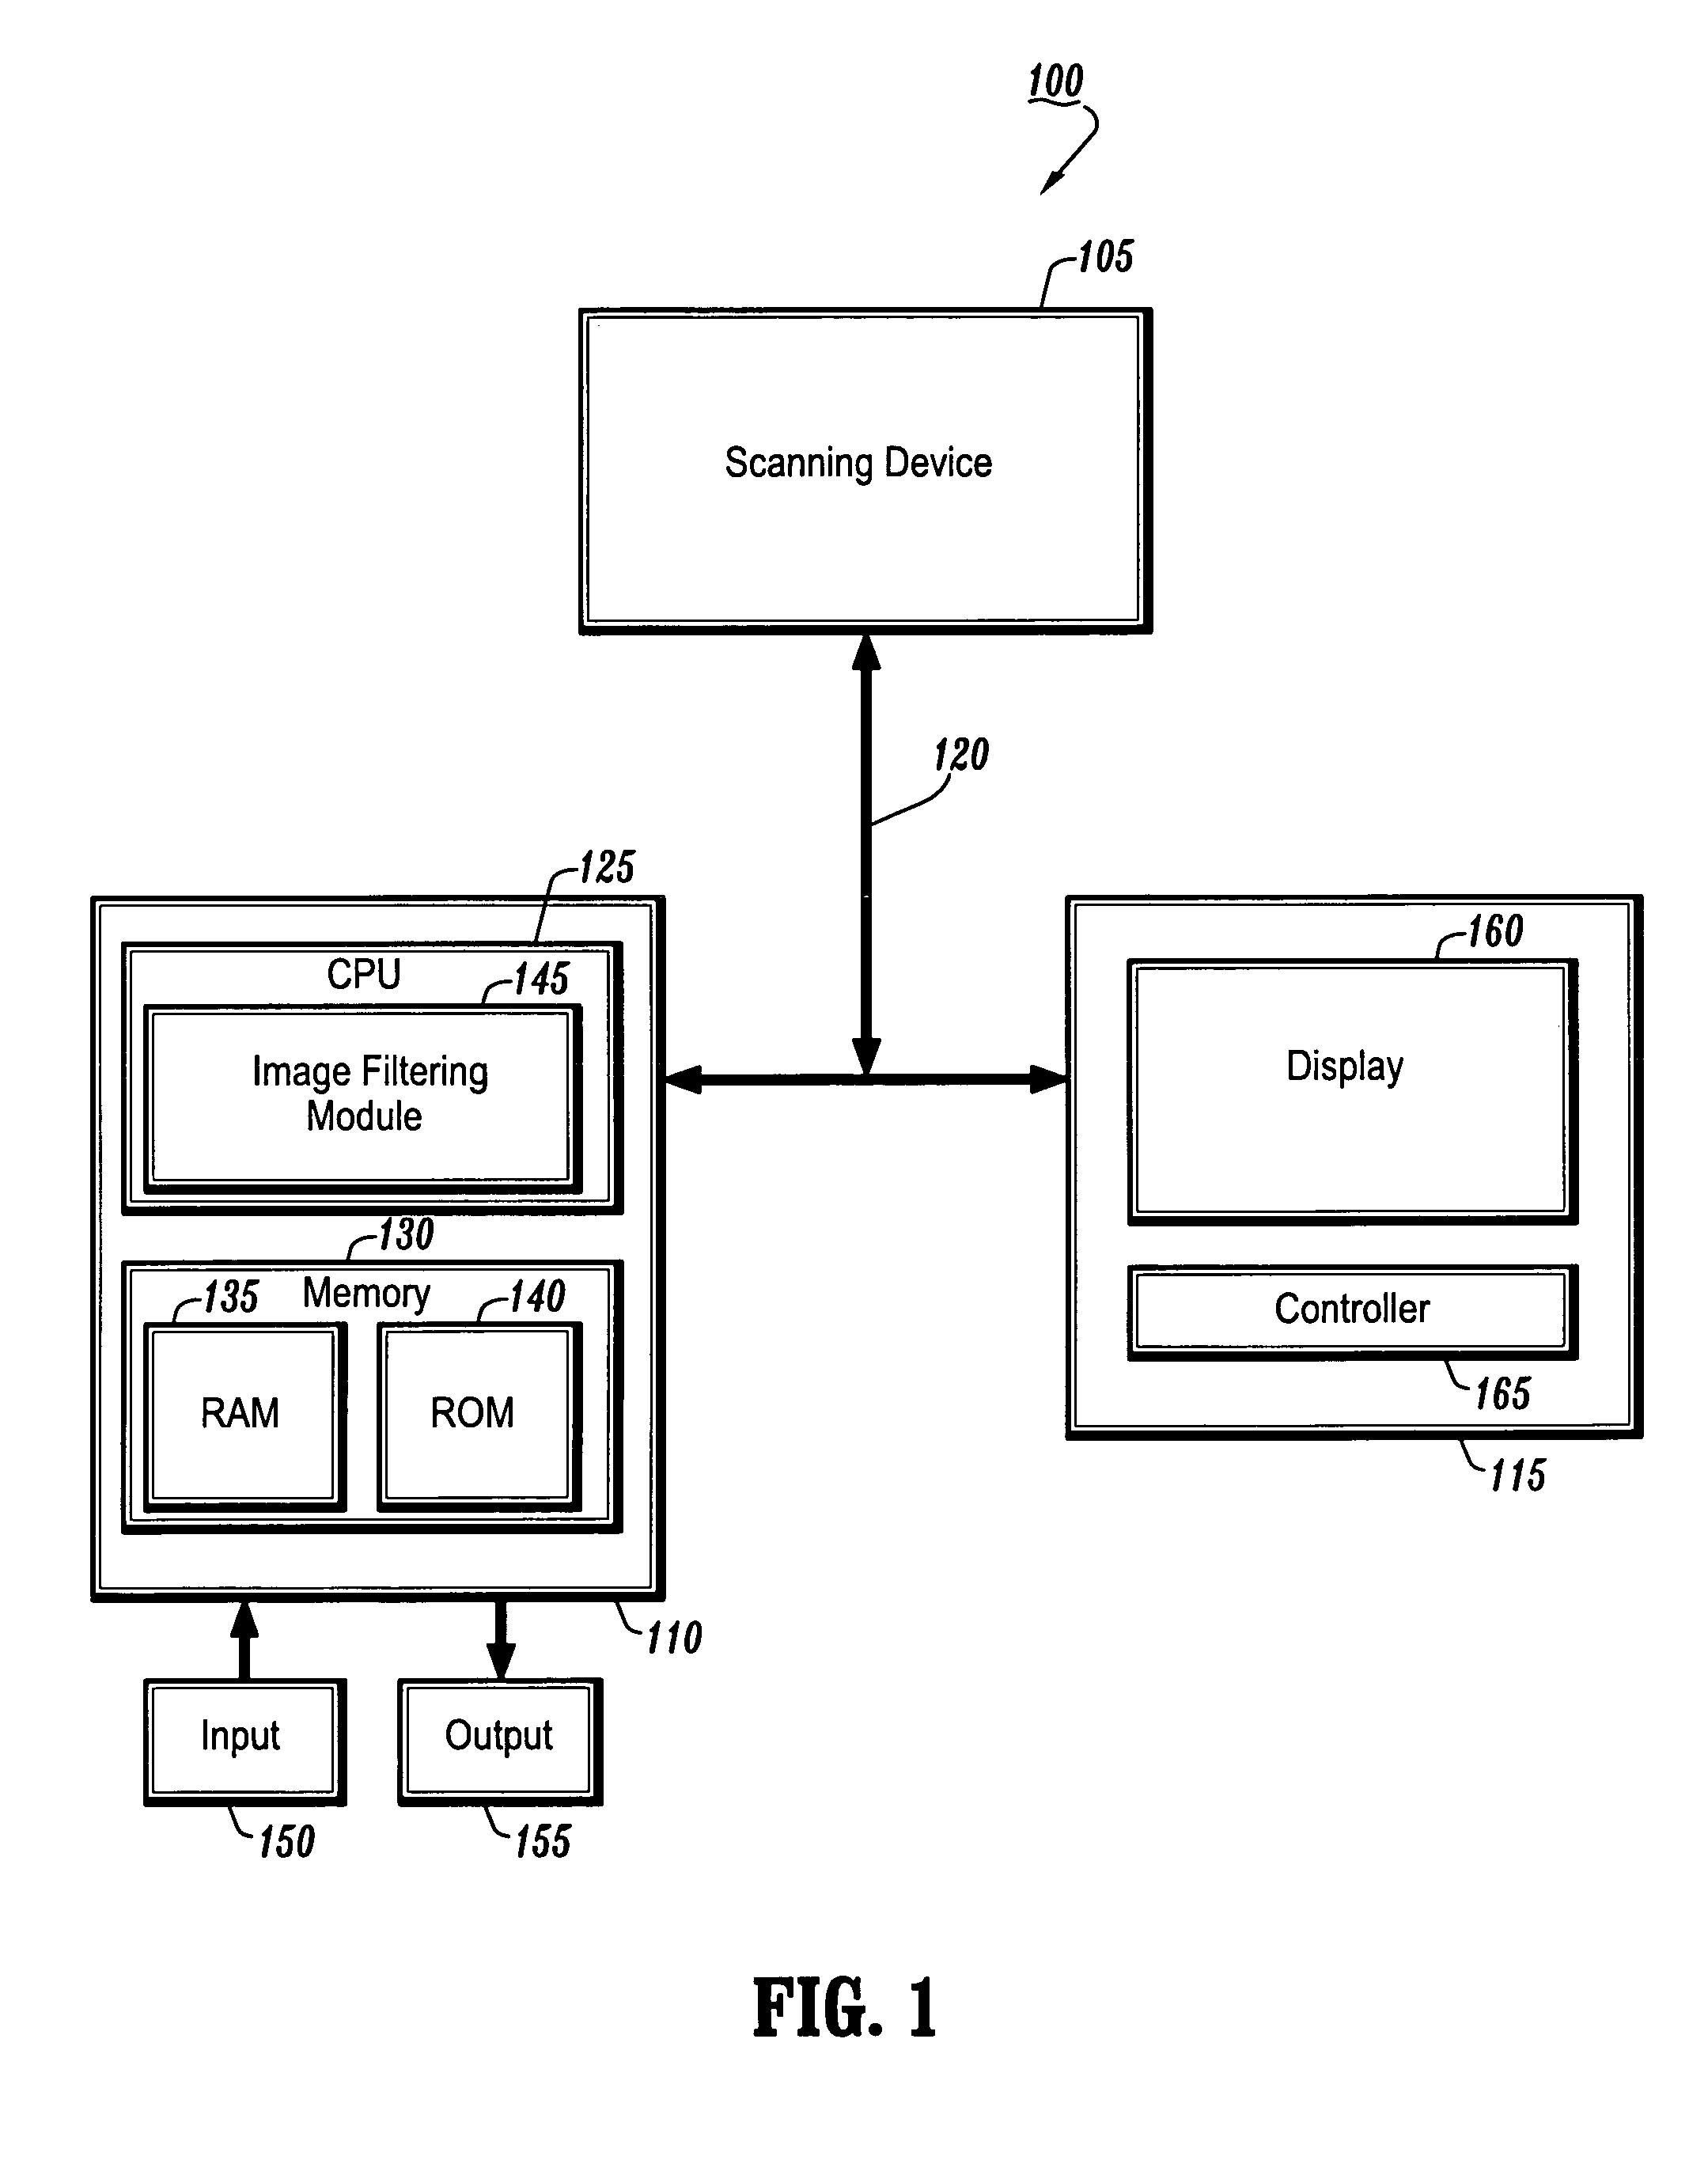 System and method for filtering noise from a medical image